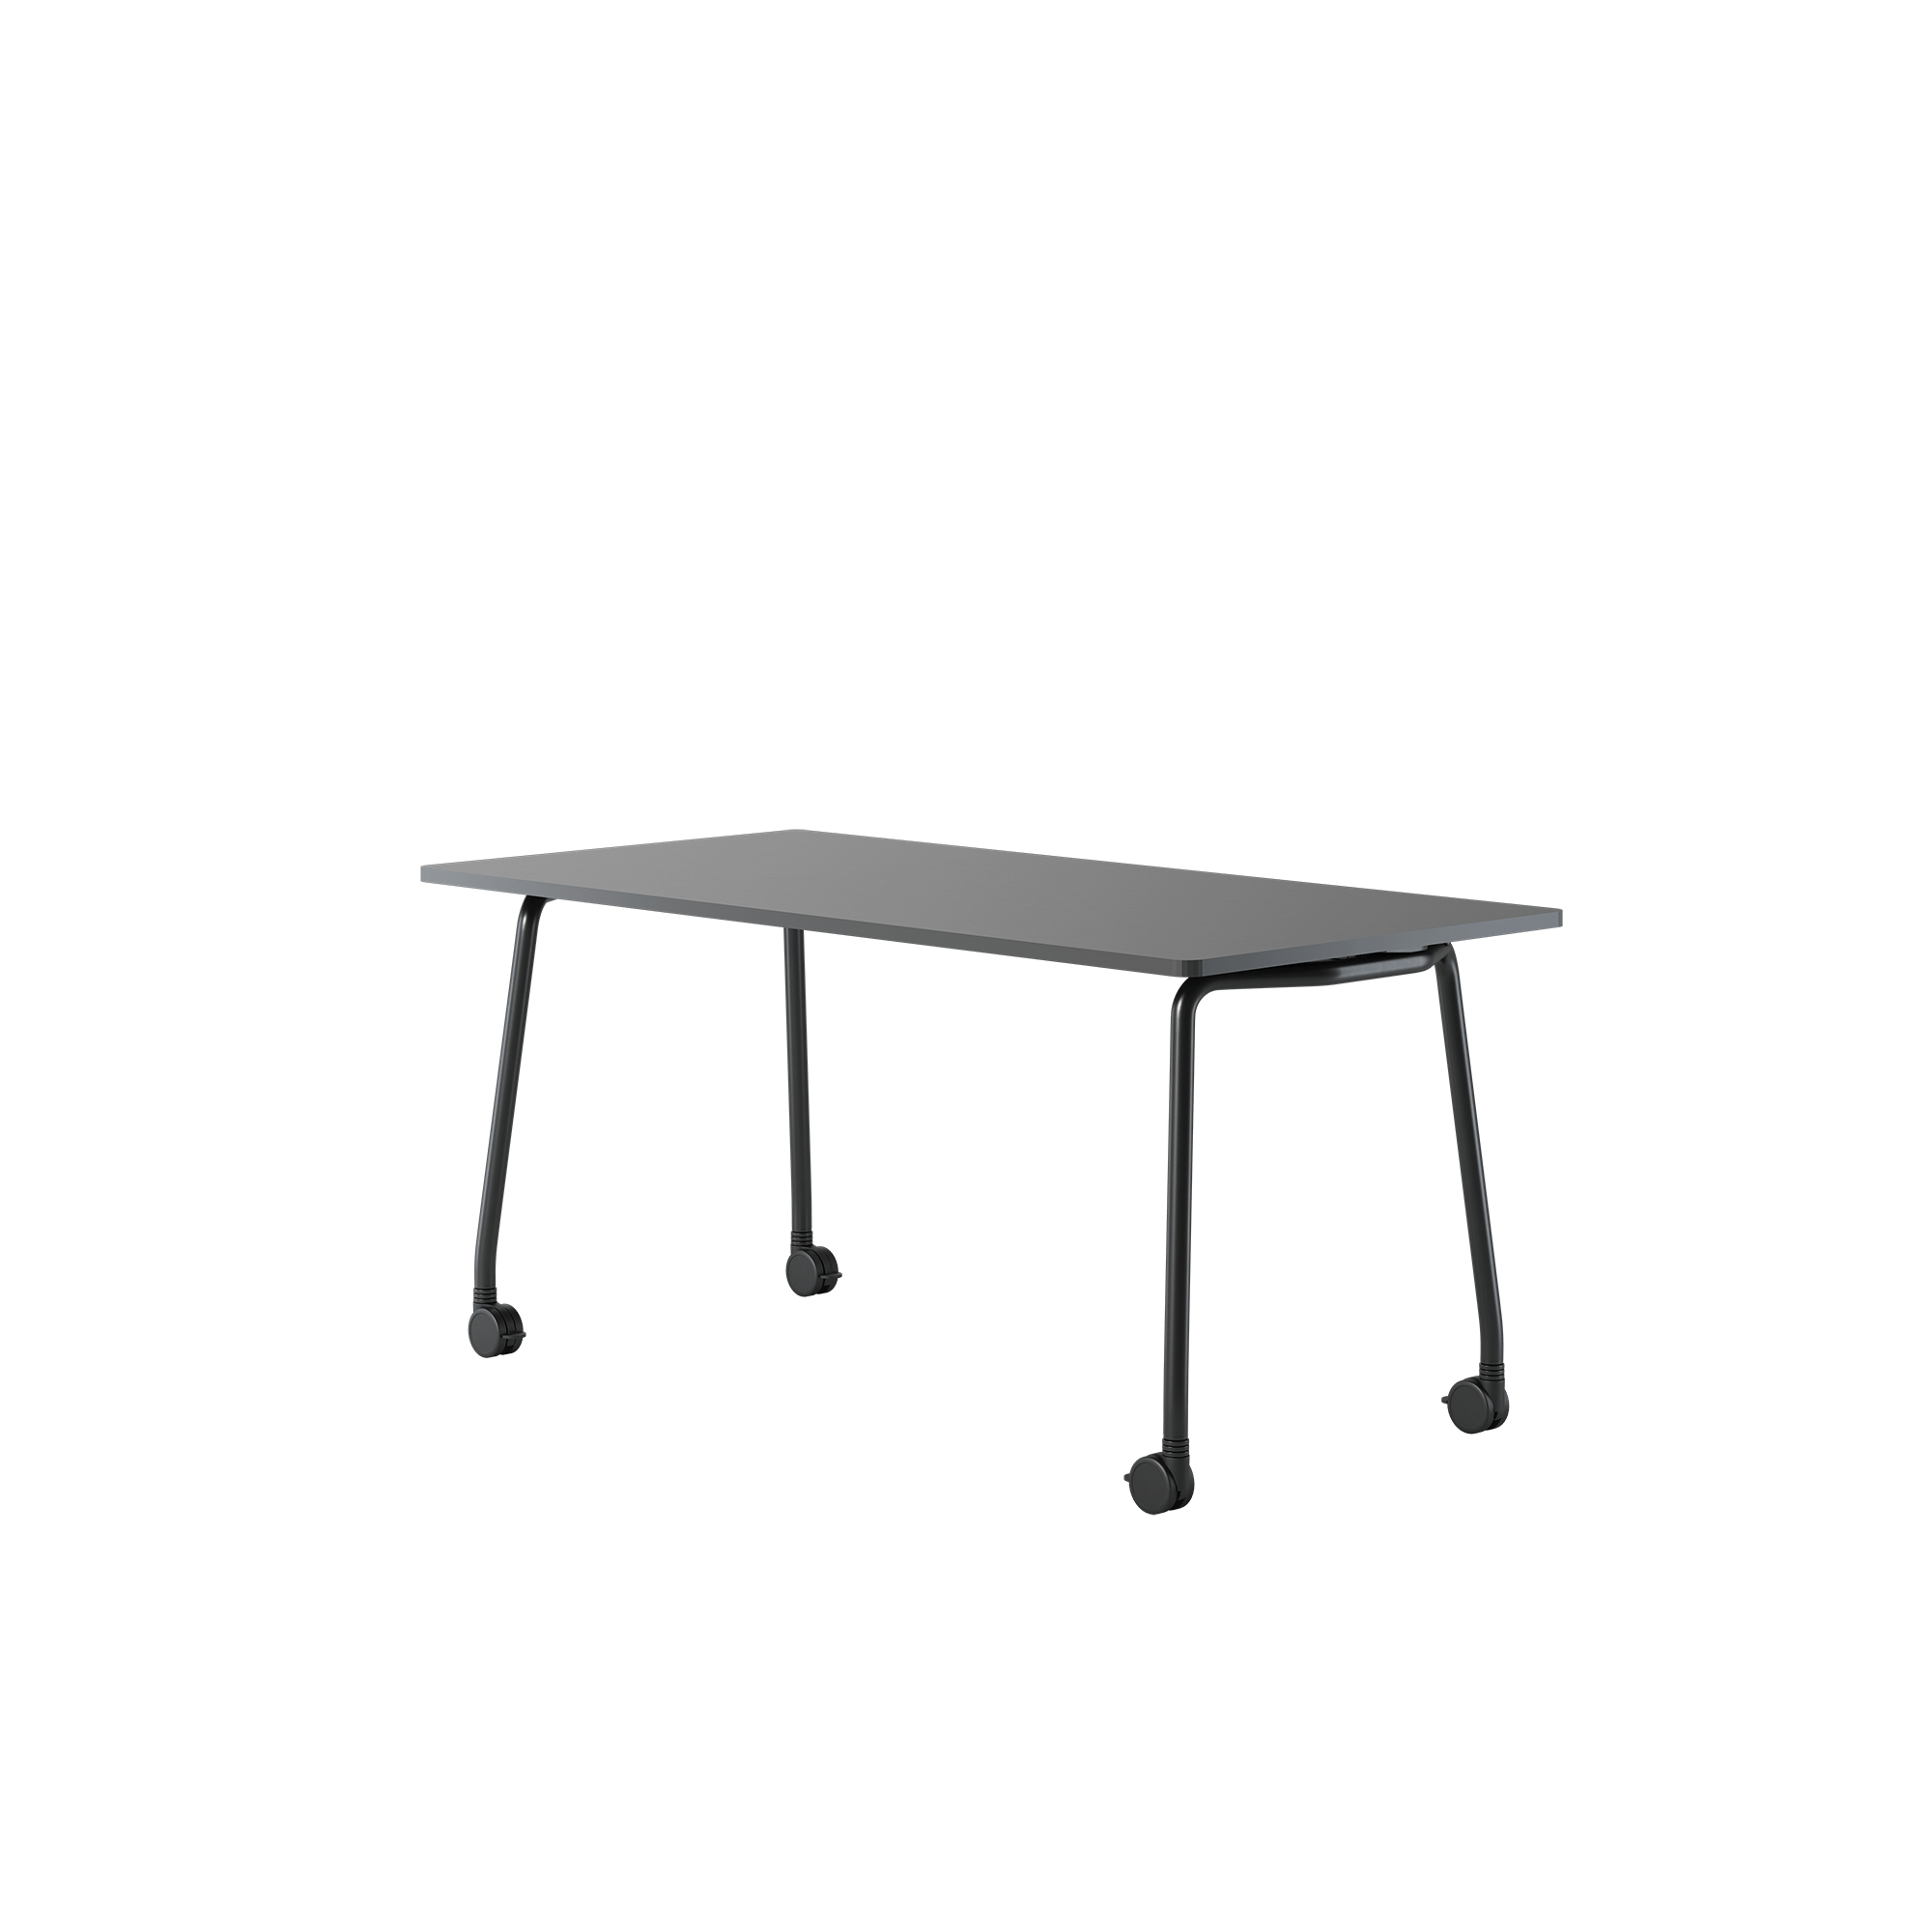 OCEE&FOUR – Tables – FourFold - 160x80 – Packshot Image 1